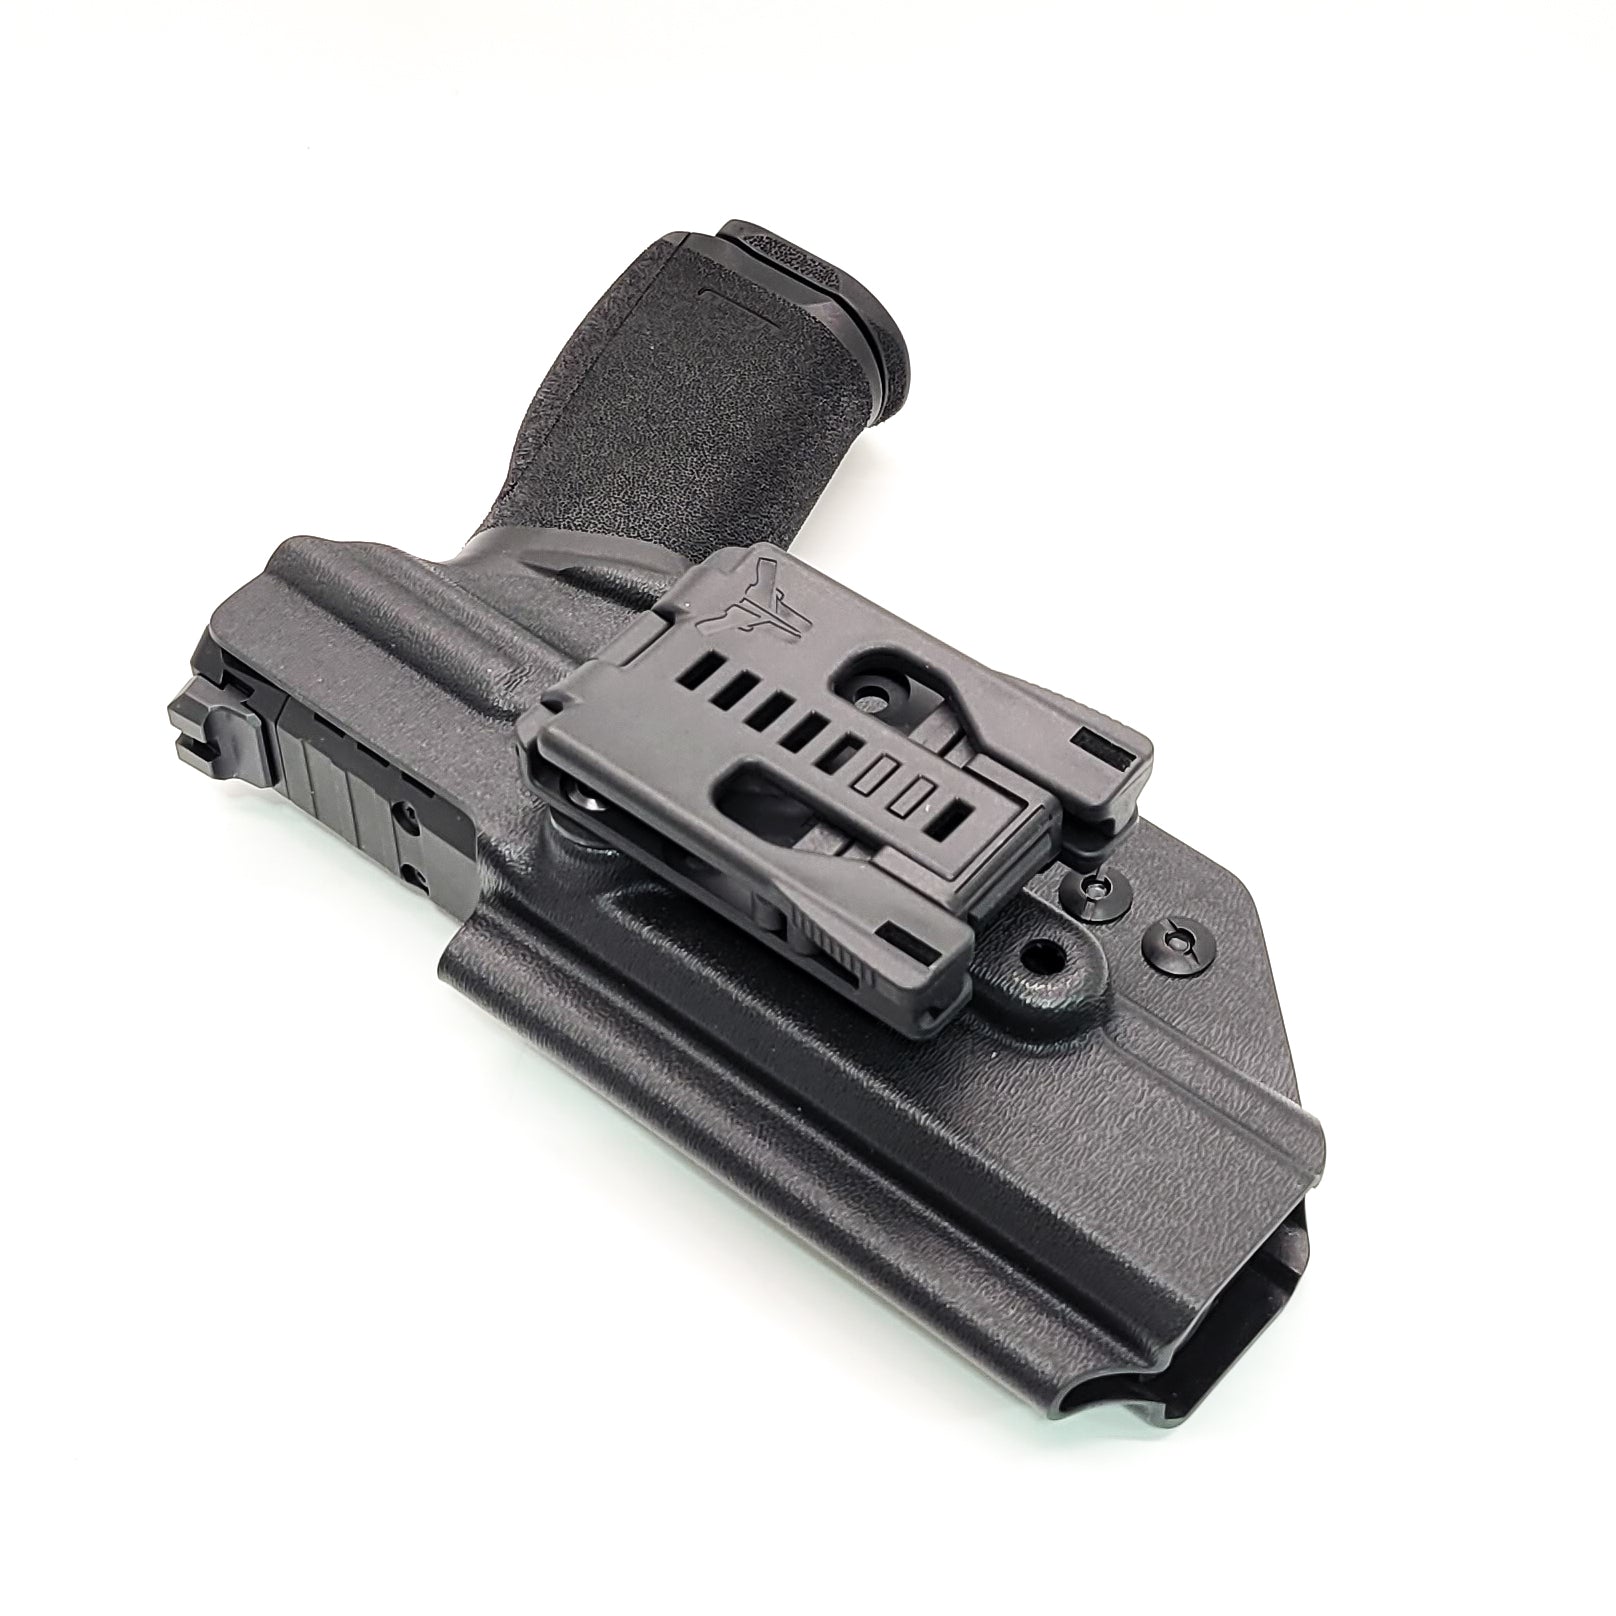 For the best, highest quality, Kydex OWB Outside Waistband Holster designed to fit the Springfield Armory Echelon, shop Four Brothers Holters. Cleared for a red dot sight mounted to the pistol. Full sweat guard, adjustable retention, minimal material, and smooth edges to reduce printing. Proudly made in the USA.